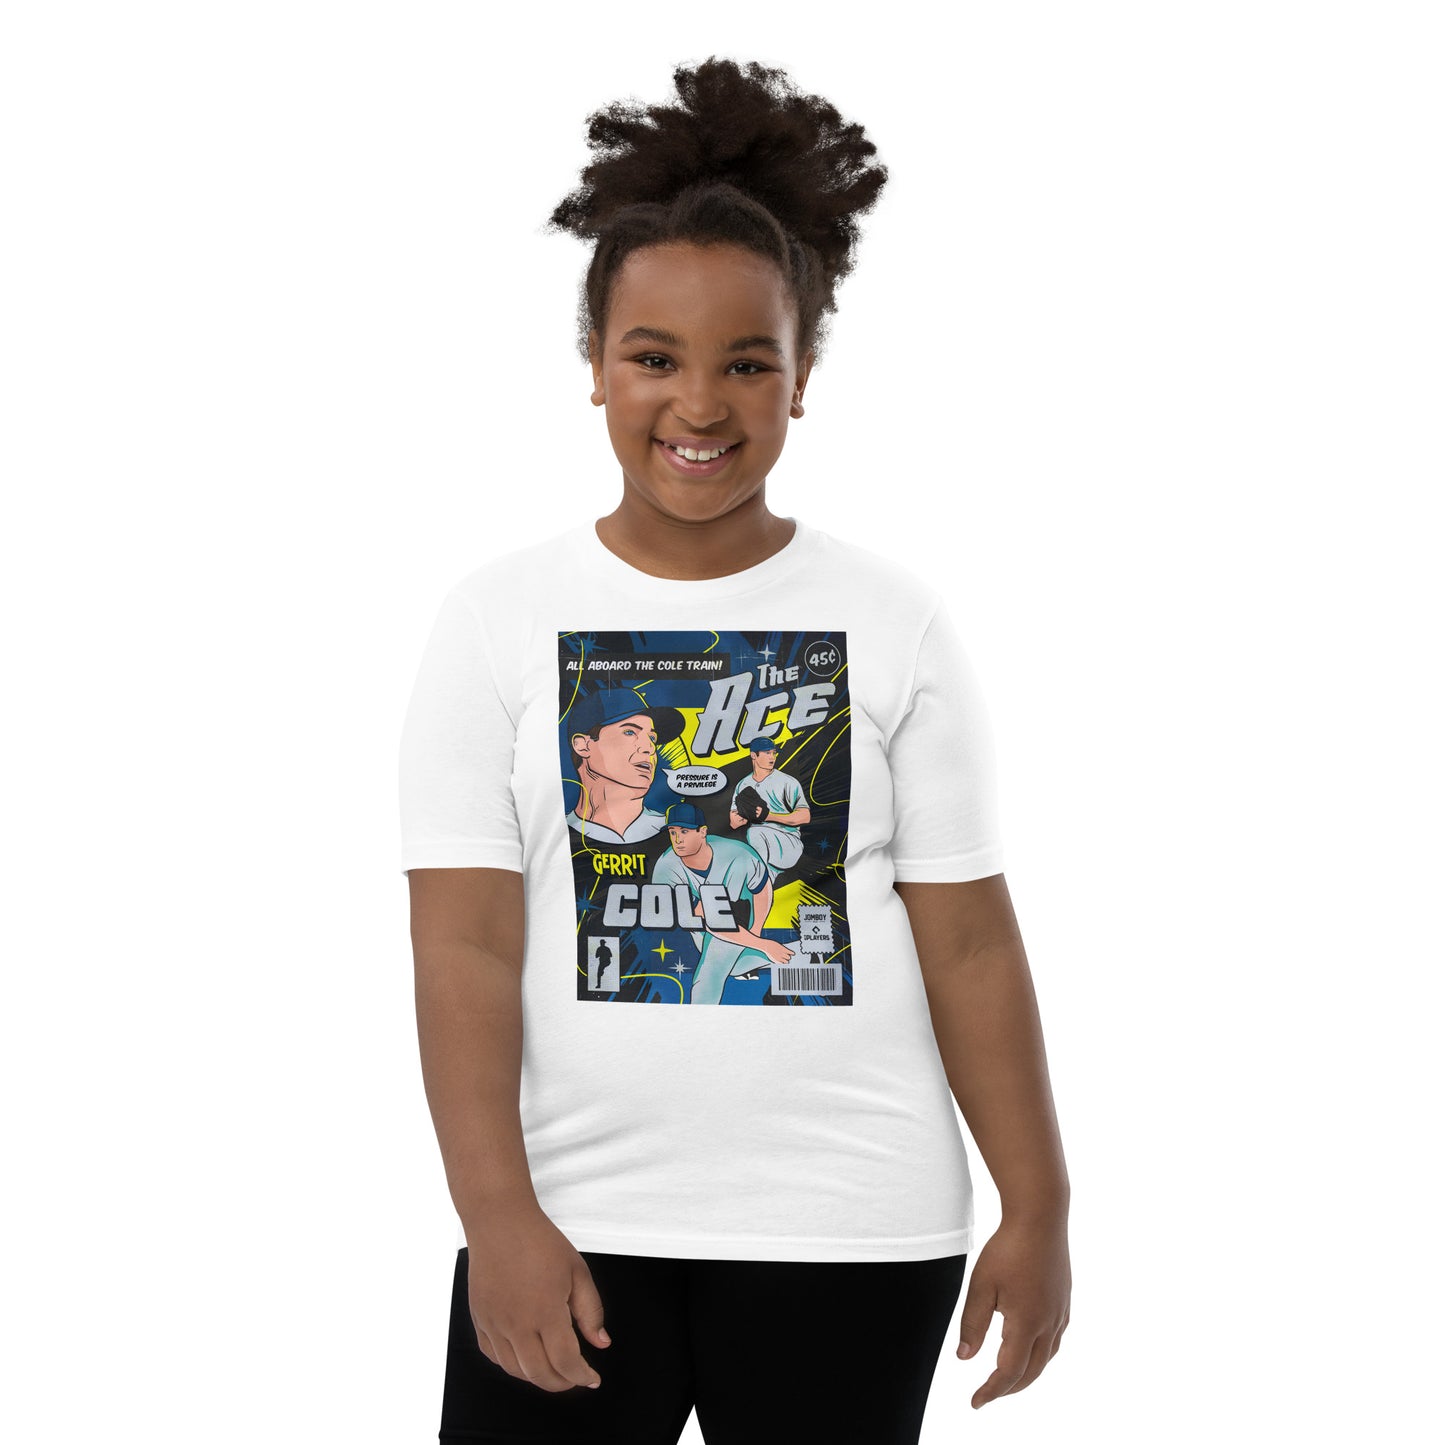 Gerrit Cole "The Ace" Comic Edition | Youth T-Shirt